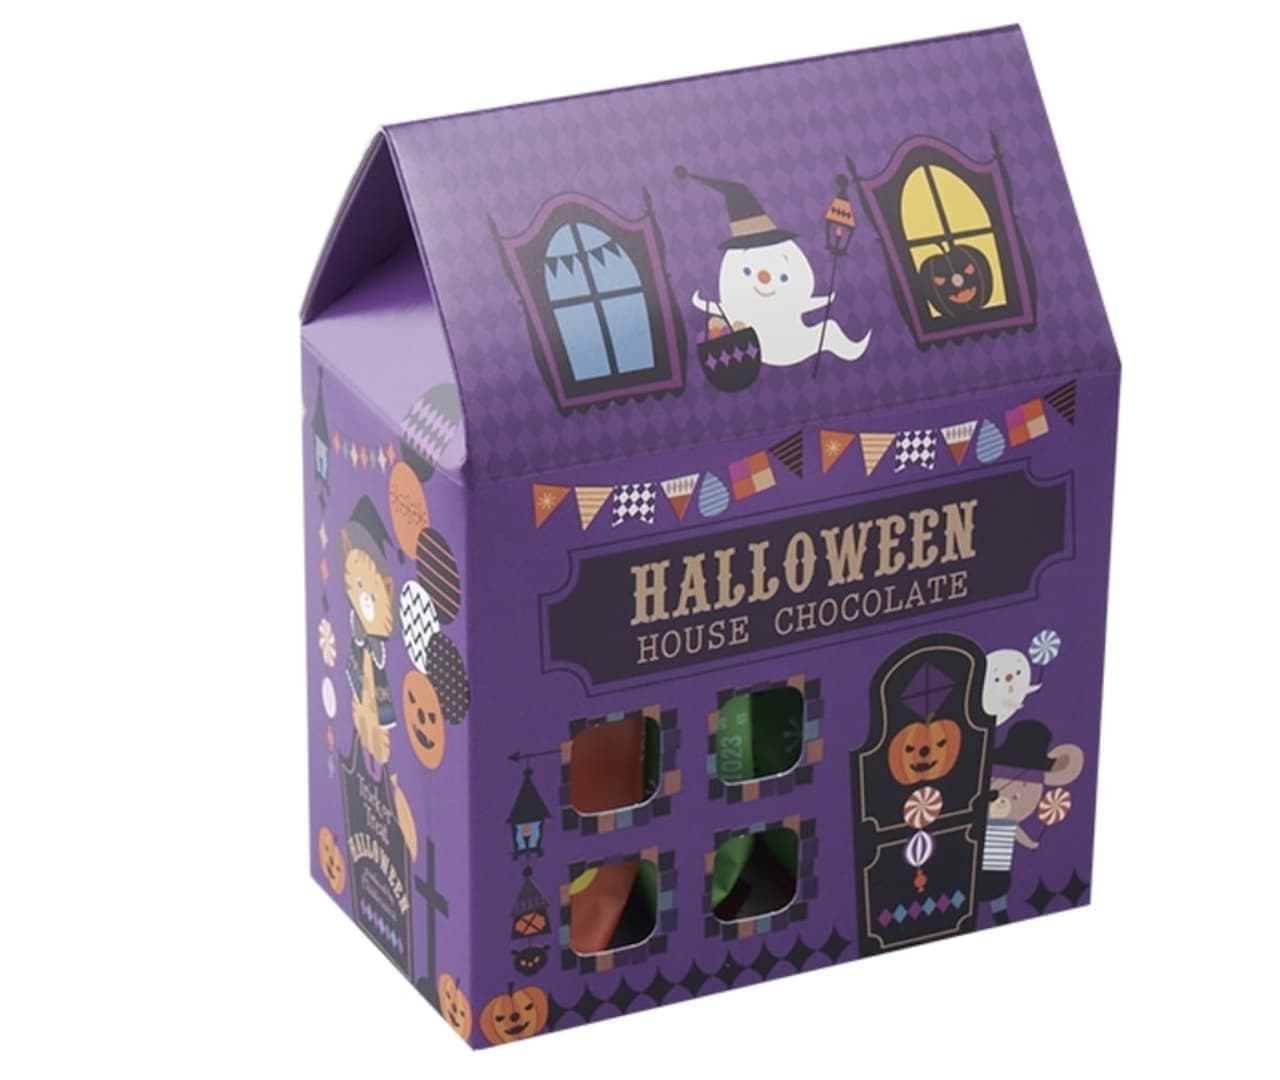 Chateraise "Halloween House Chocolate